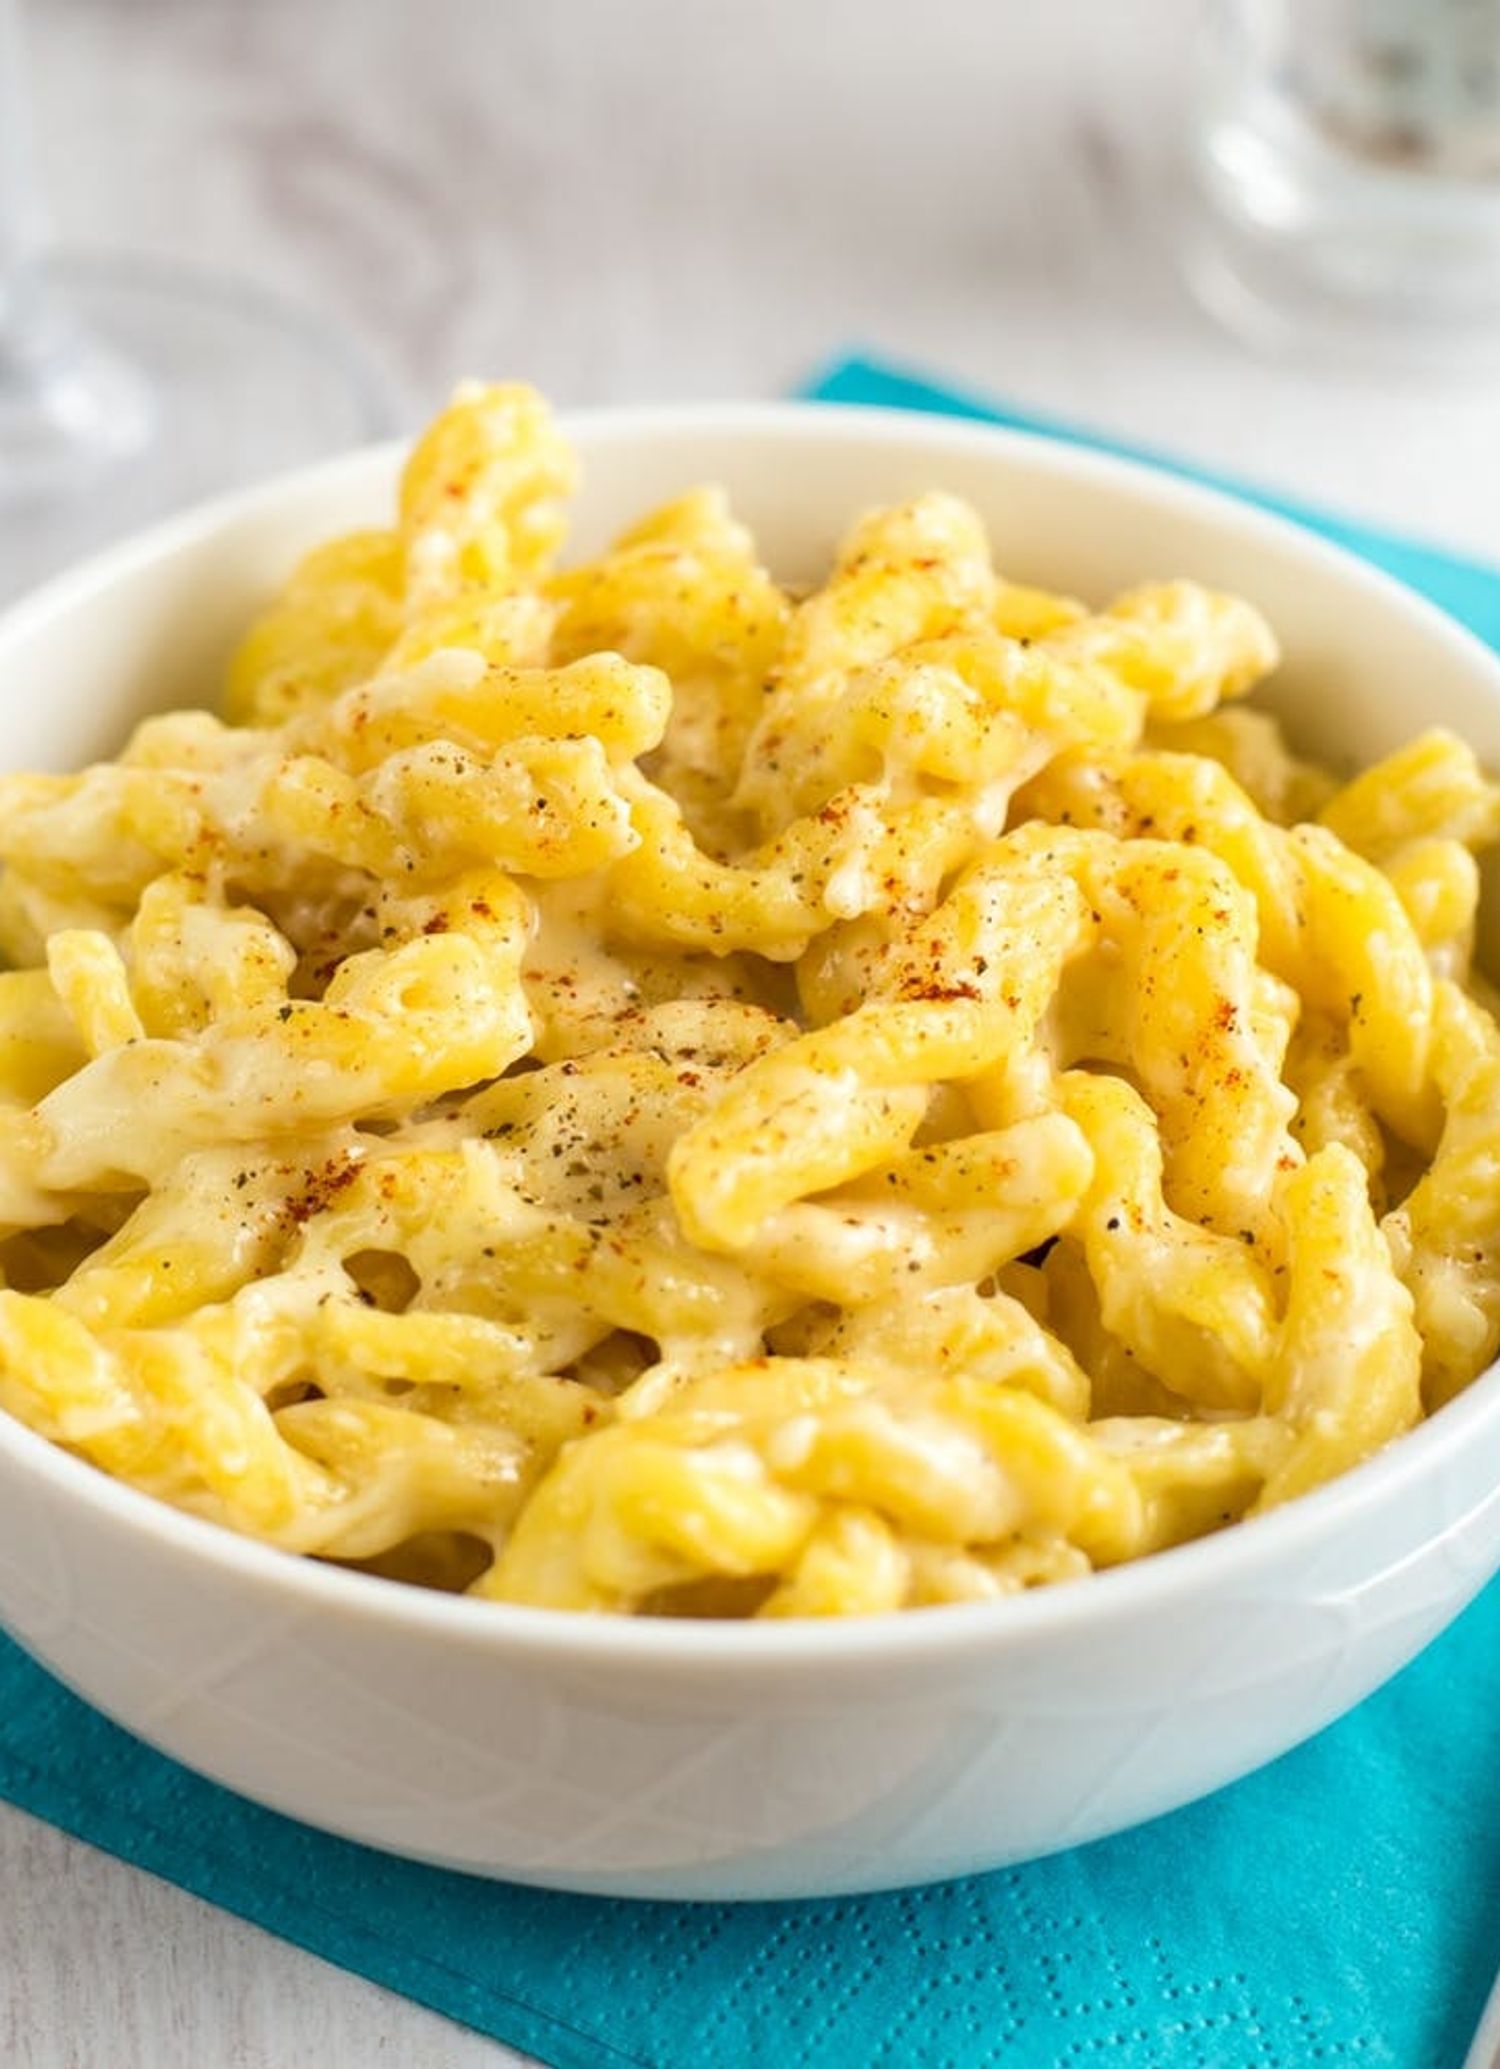 Cosy Evening Home Alone? This Single-Serving Mac and Cheese Recipe Is ...